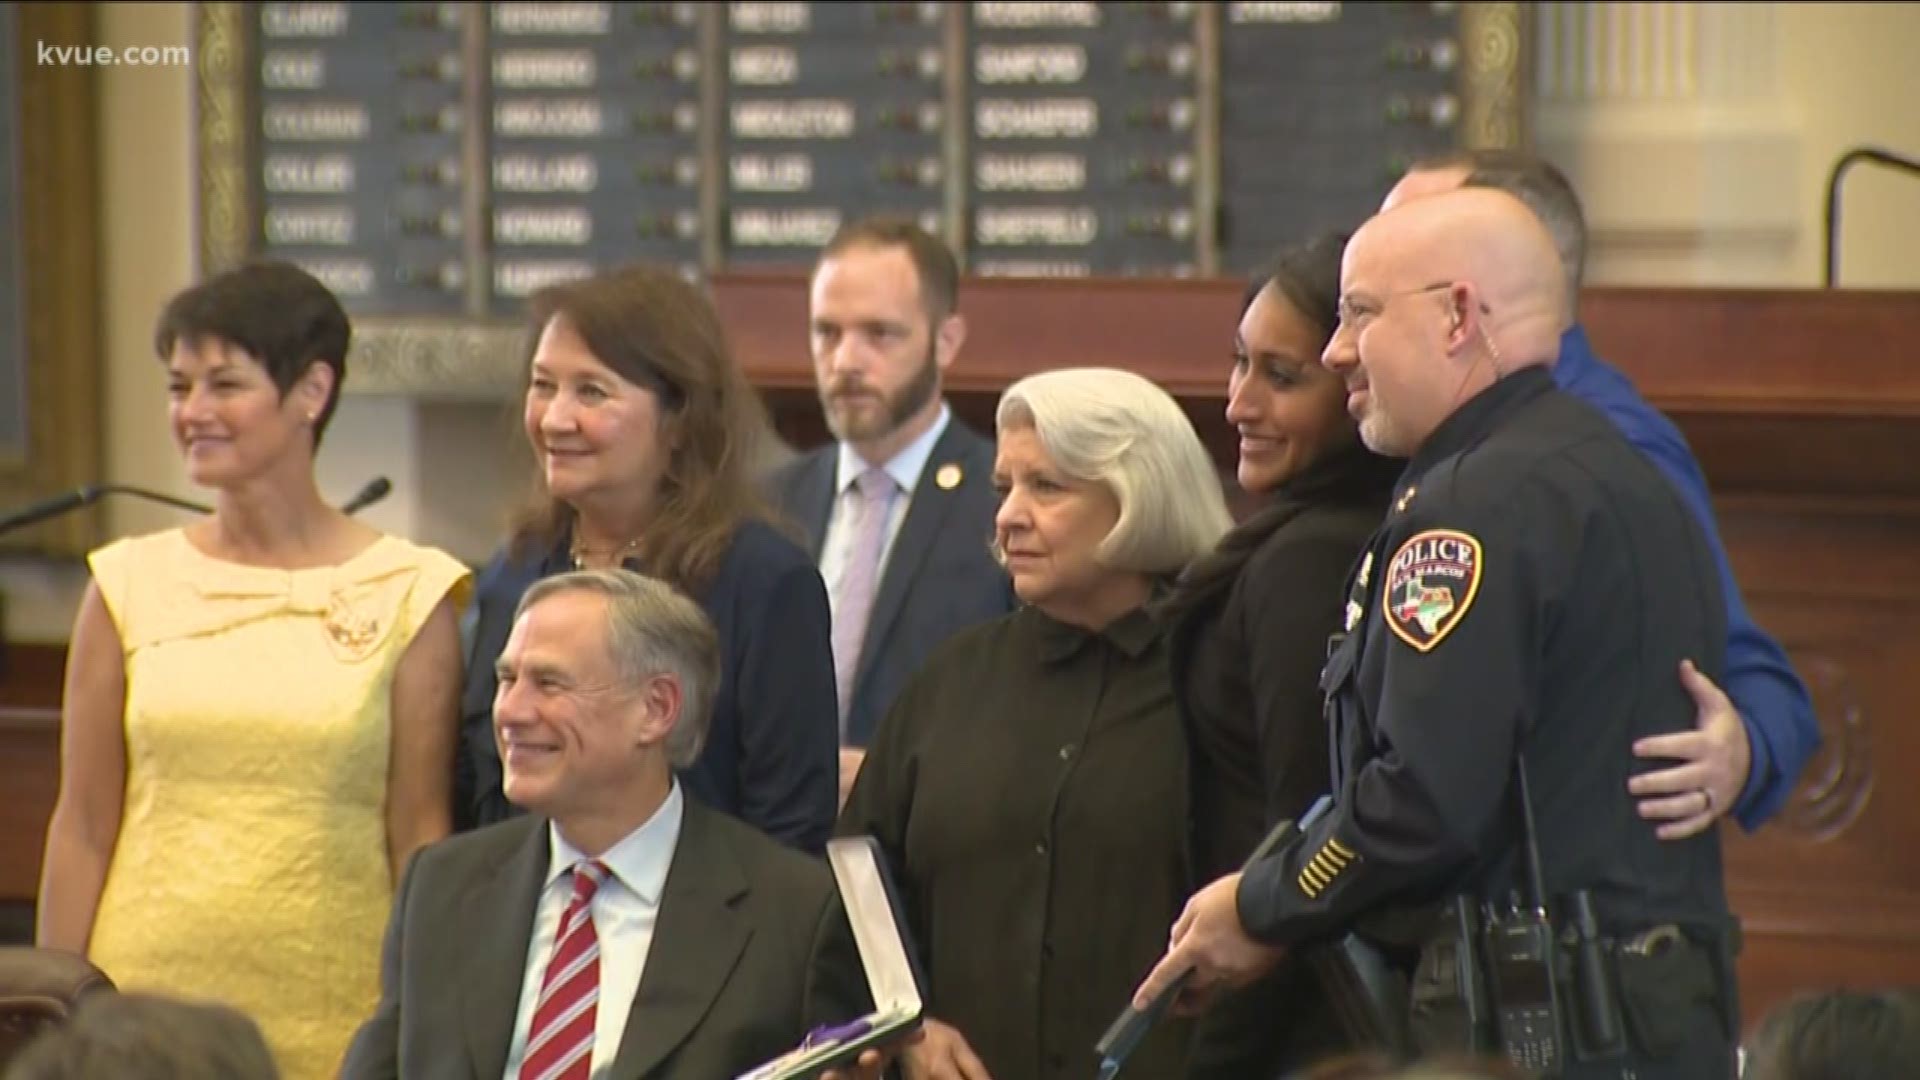 Fifty police officers, firefighters and other first responders were recognized for their sacrifice in the line of duty.